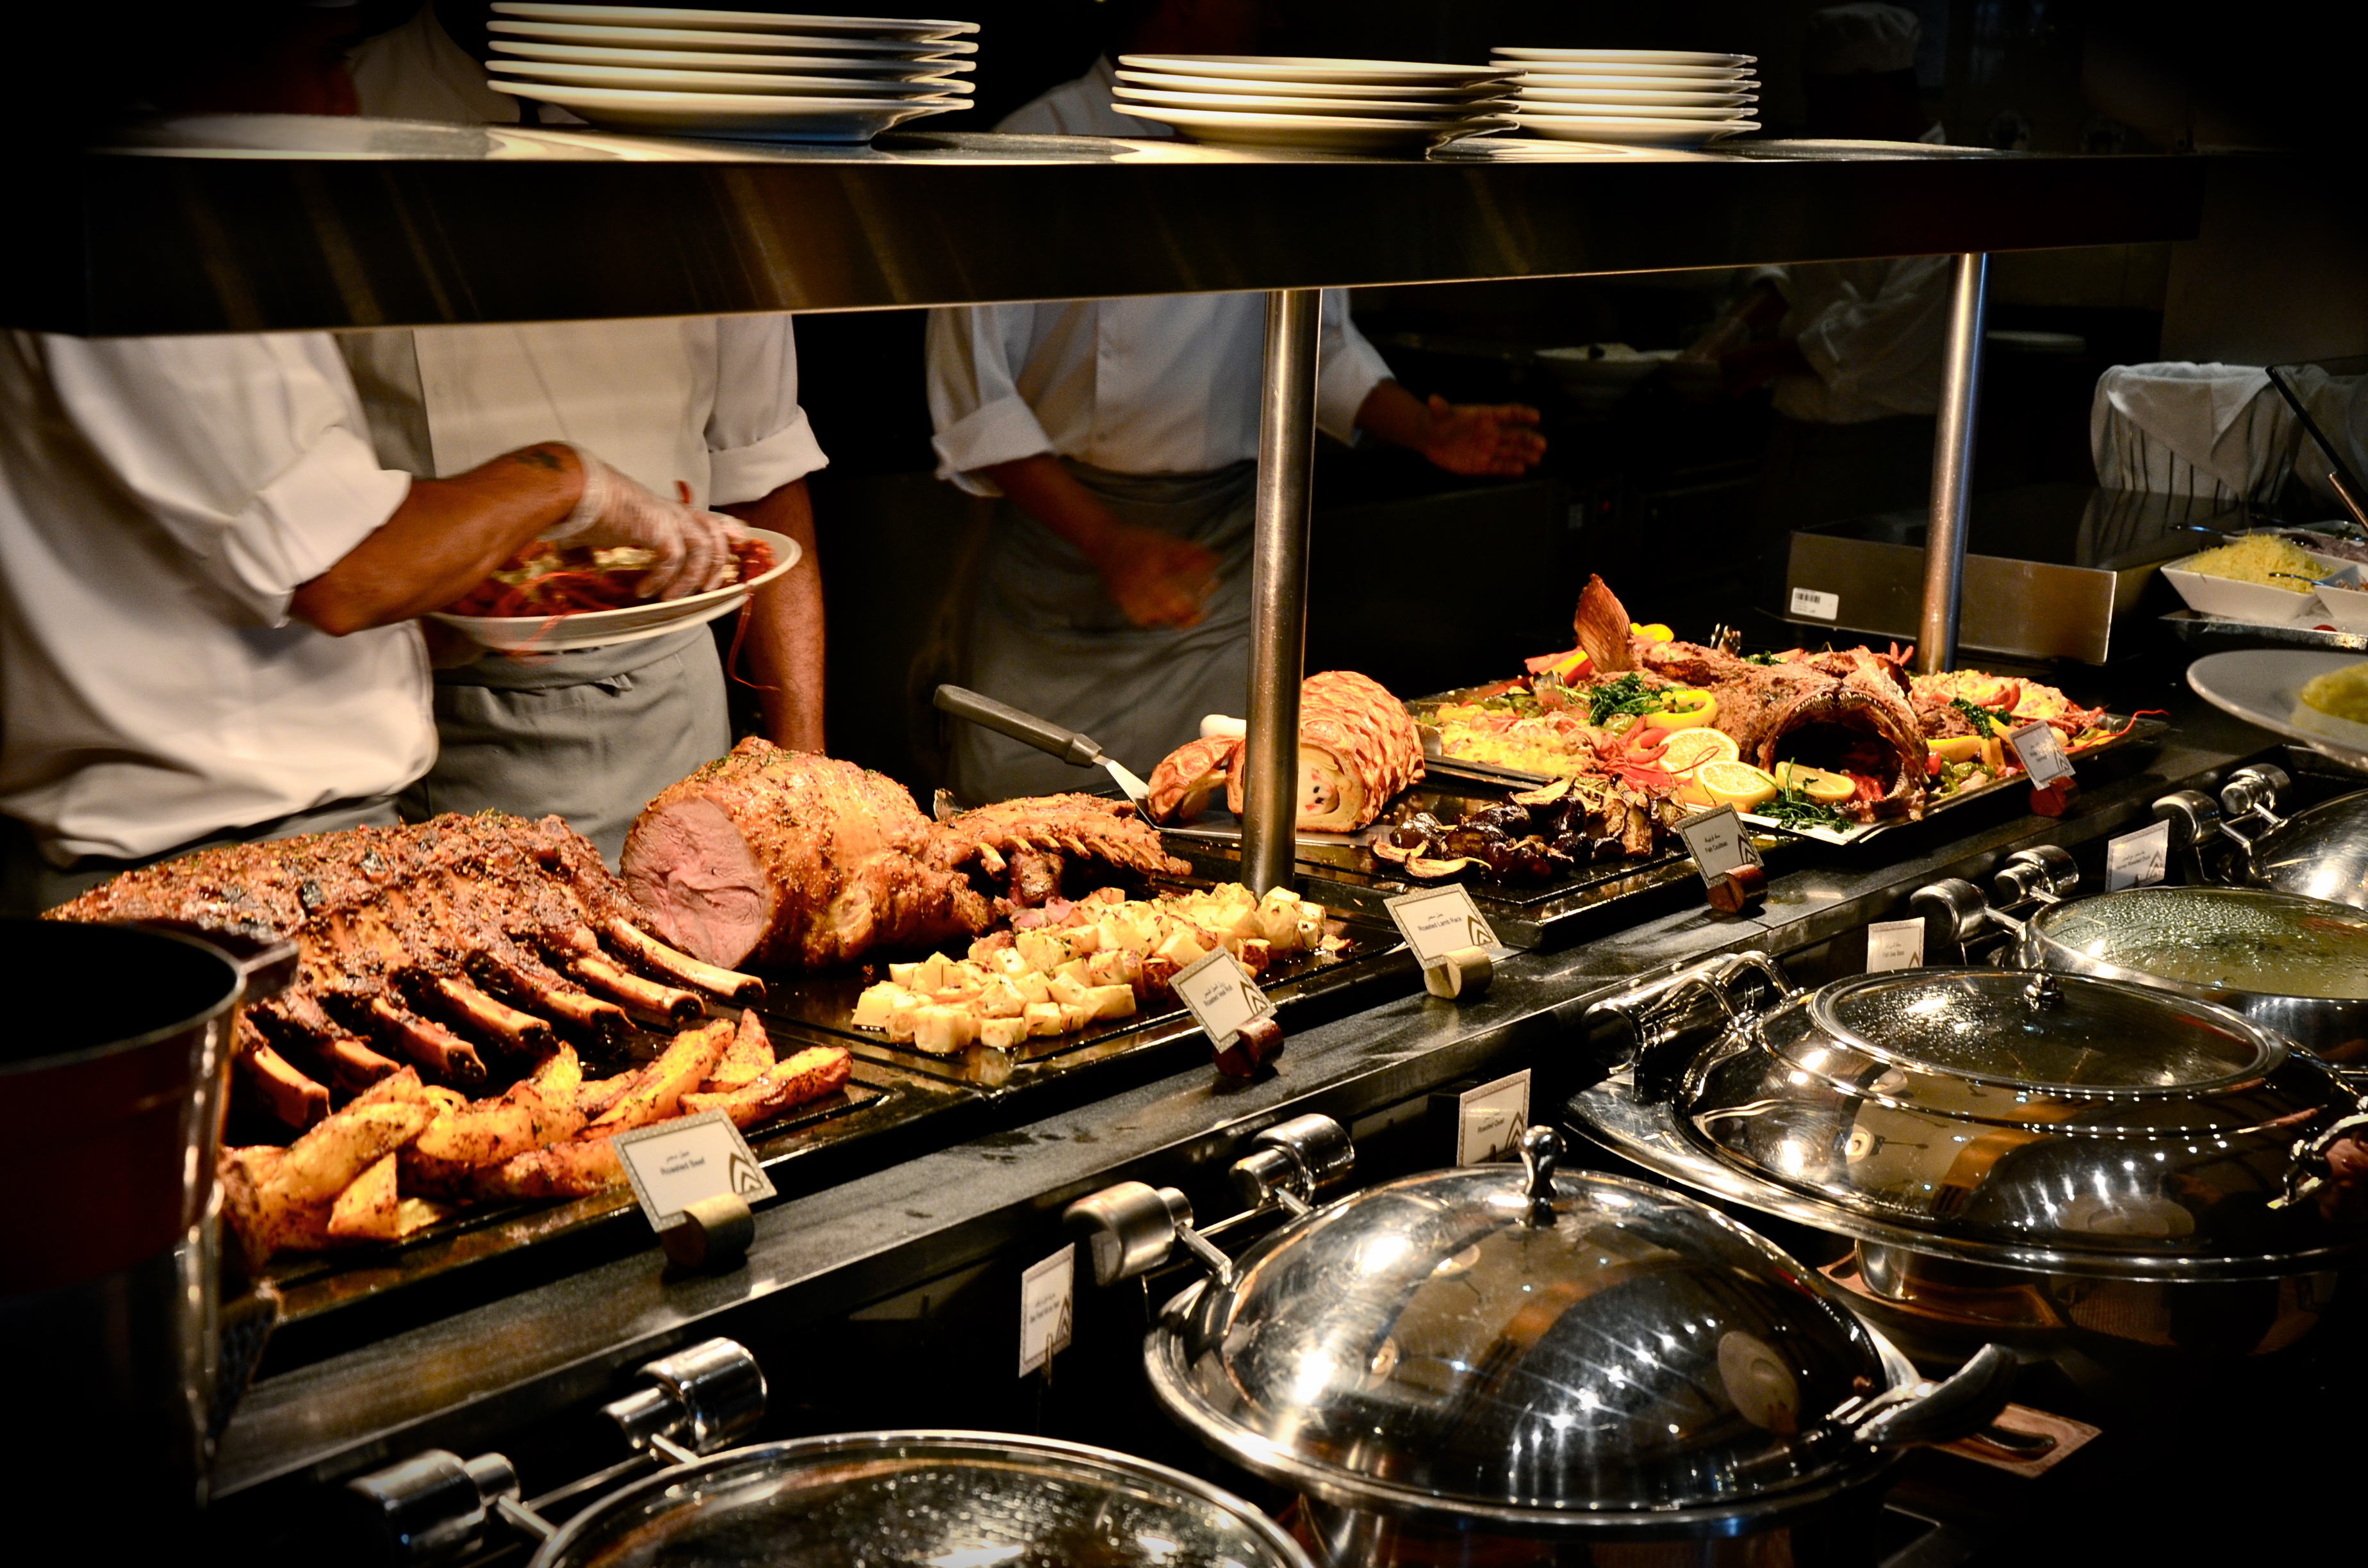 Carving station – Roasted veal leg, lamb rack, roasted beef rack, whole  roasted fish, lobster thermidor, yorkshire pudding and sauce –  